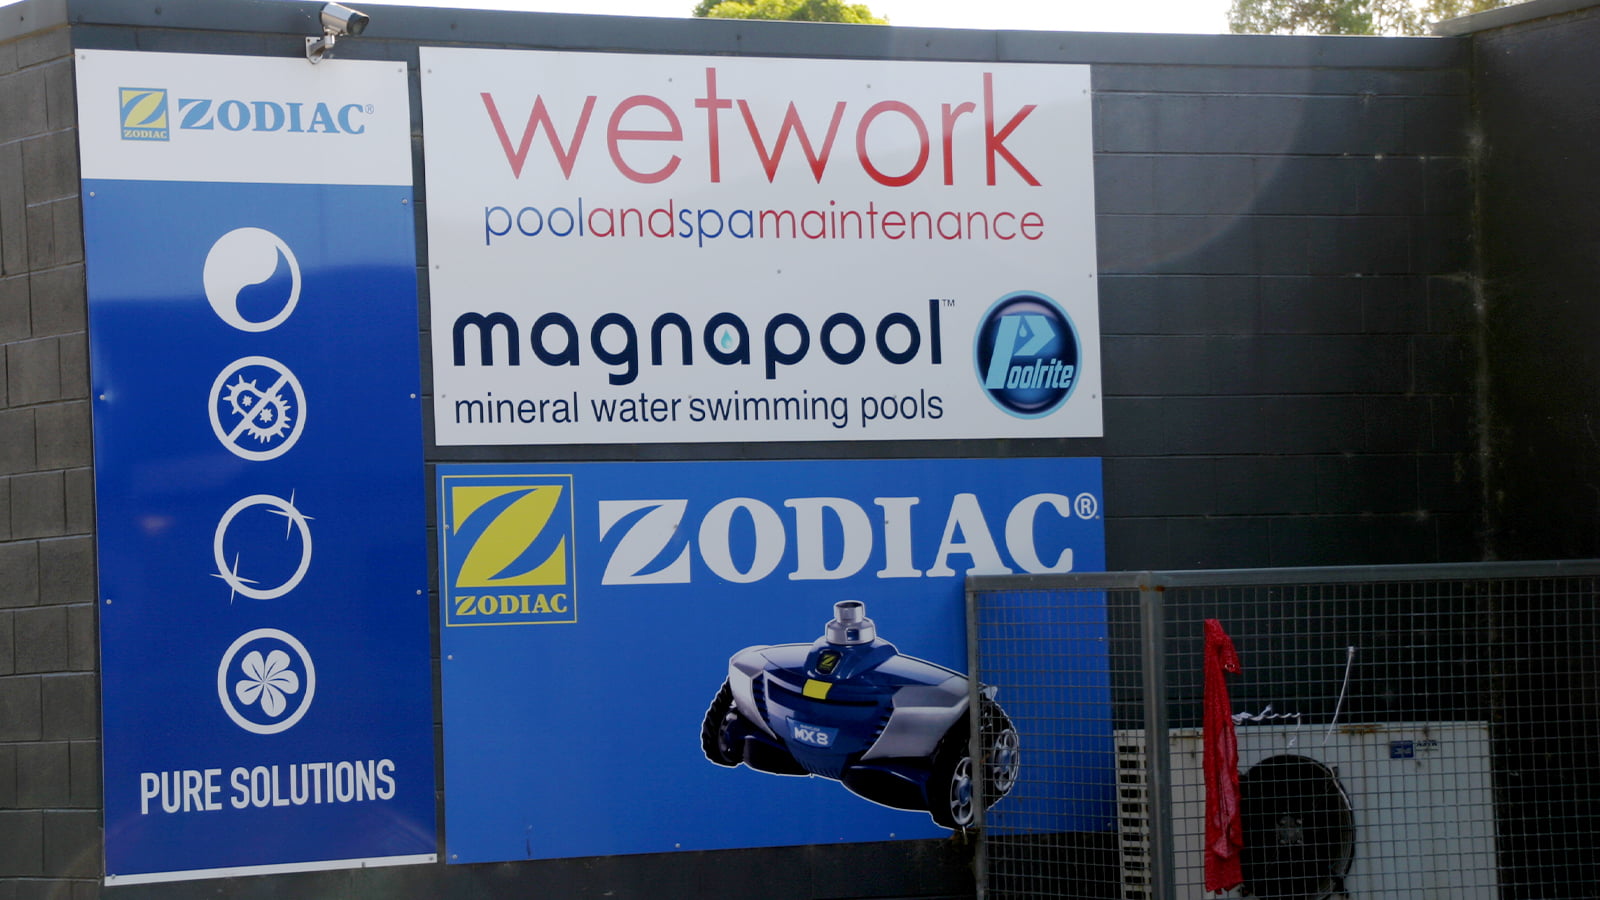 Wetwork Pool and Spa Maintenance